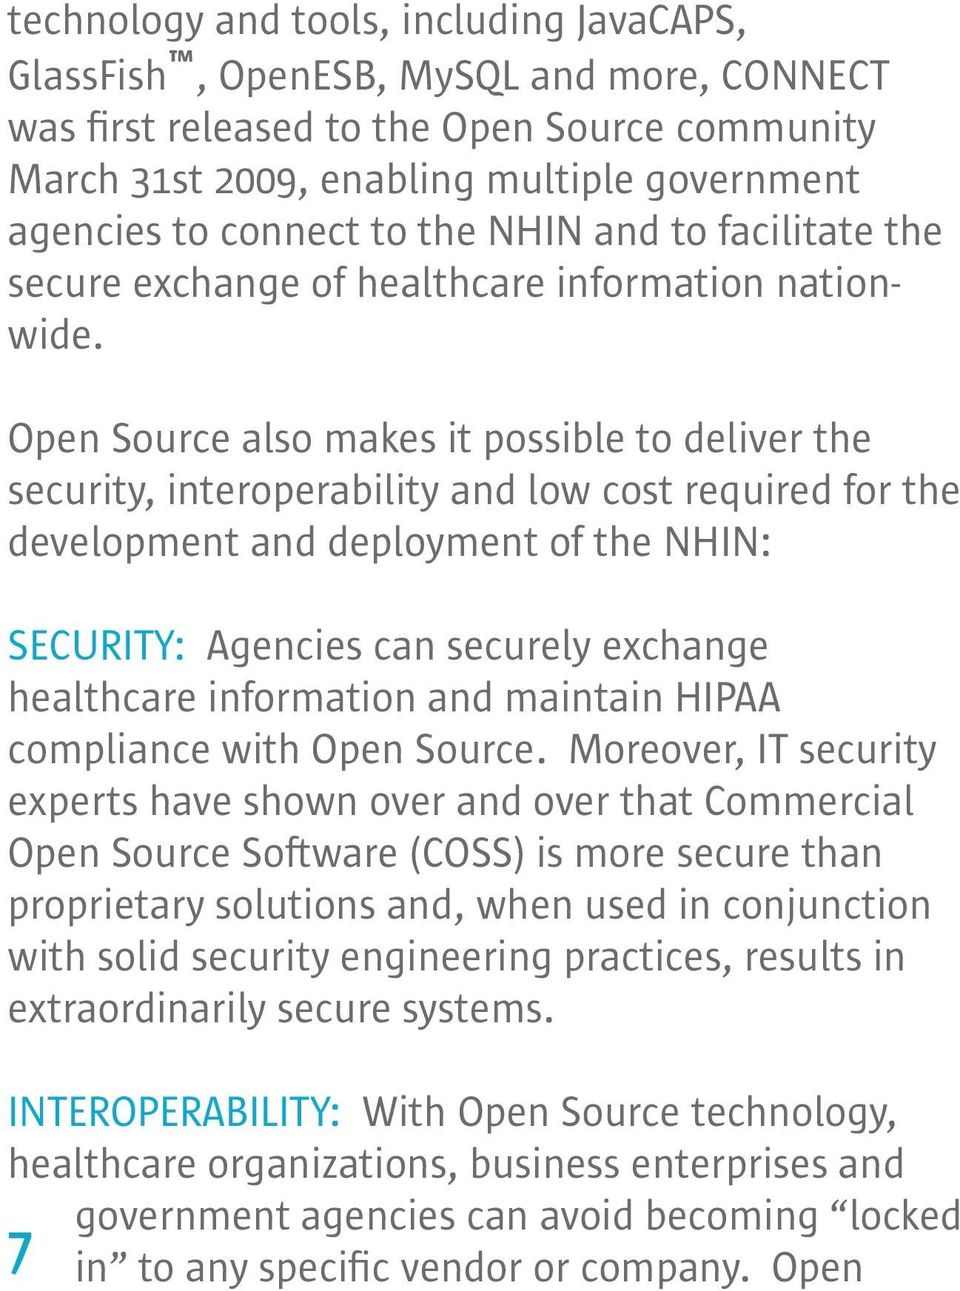 Open Source also makes it possible to deliver the security, interoperability and low cost required for the development and deployment of the NHIN: SECURITY: Agencies can securely exchange healthcare